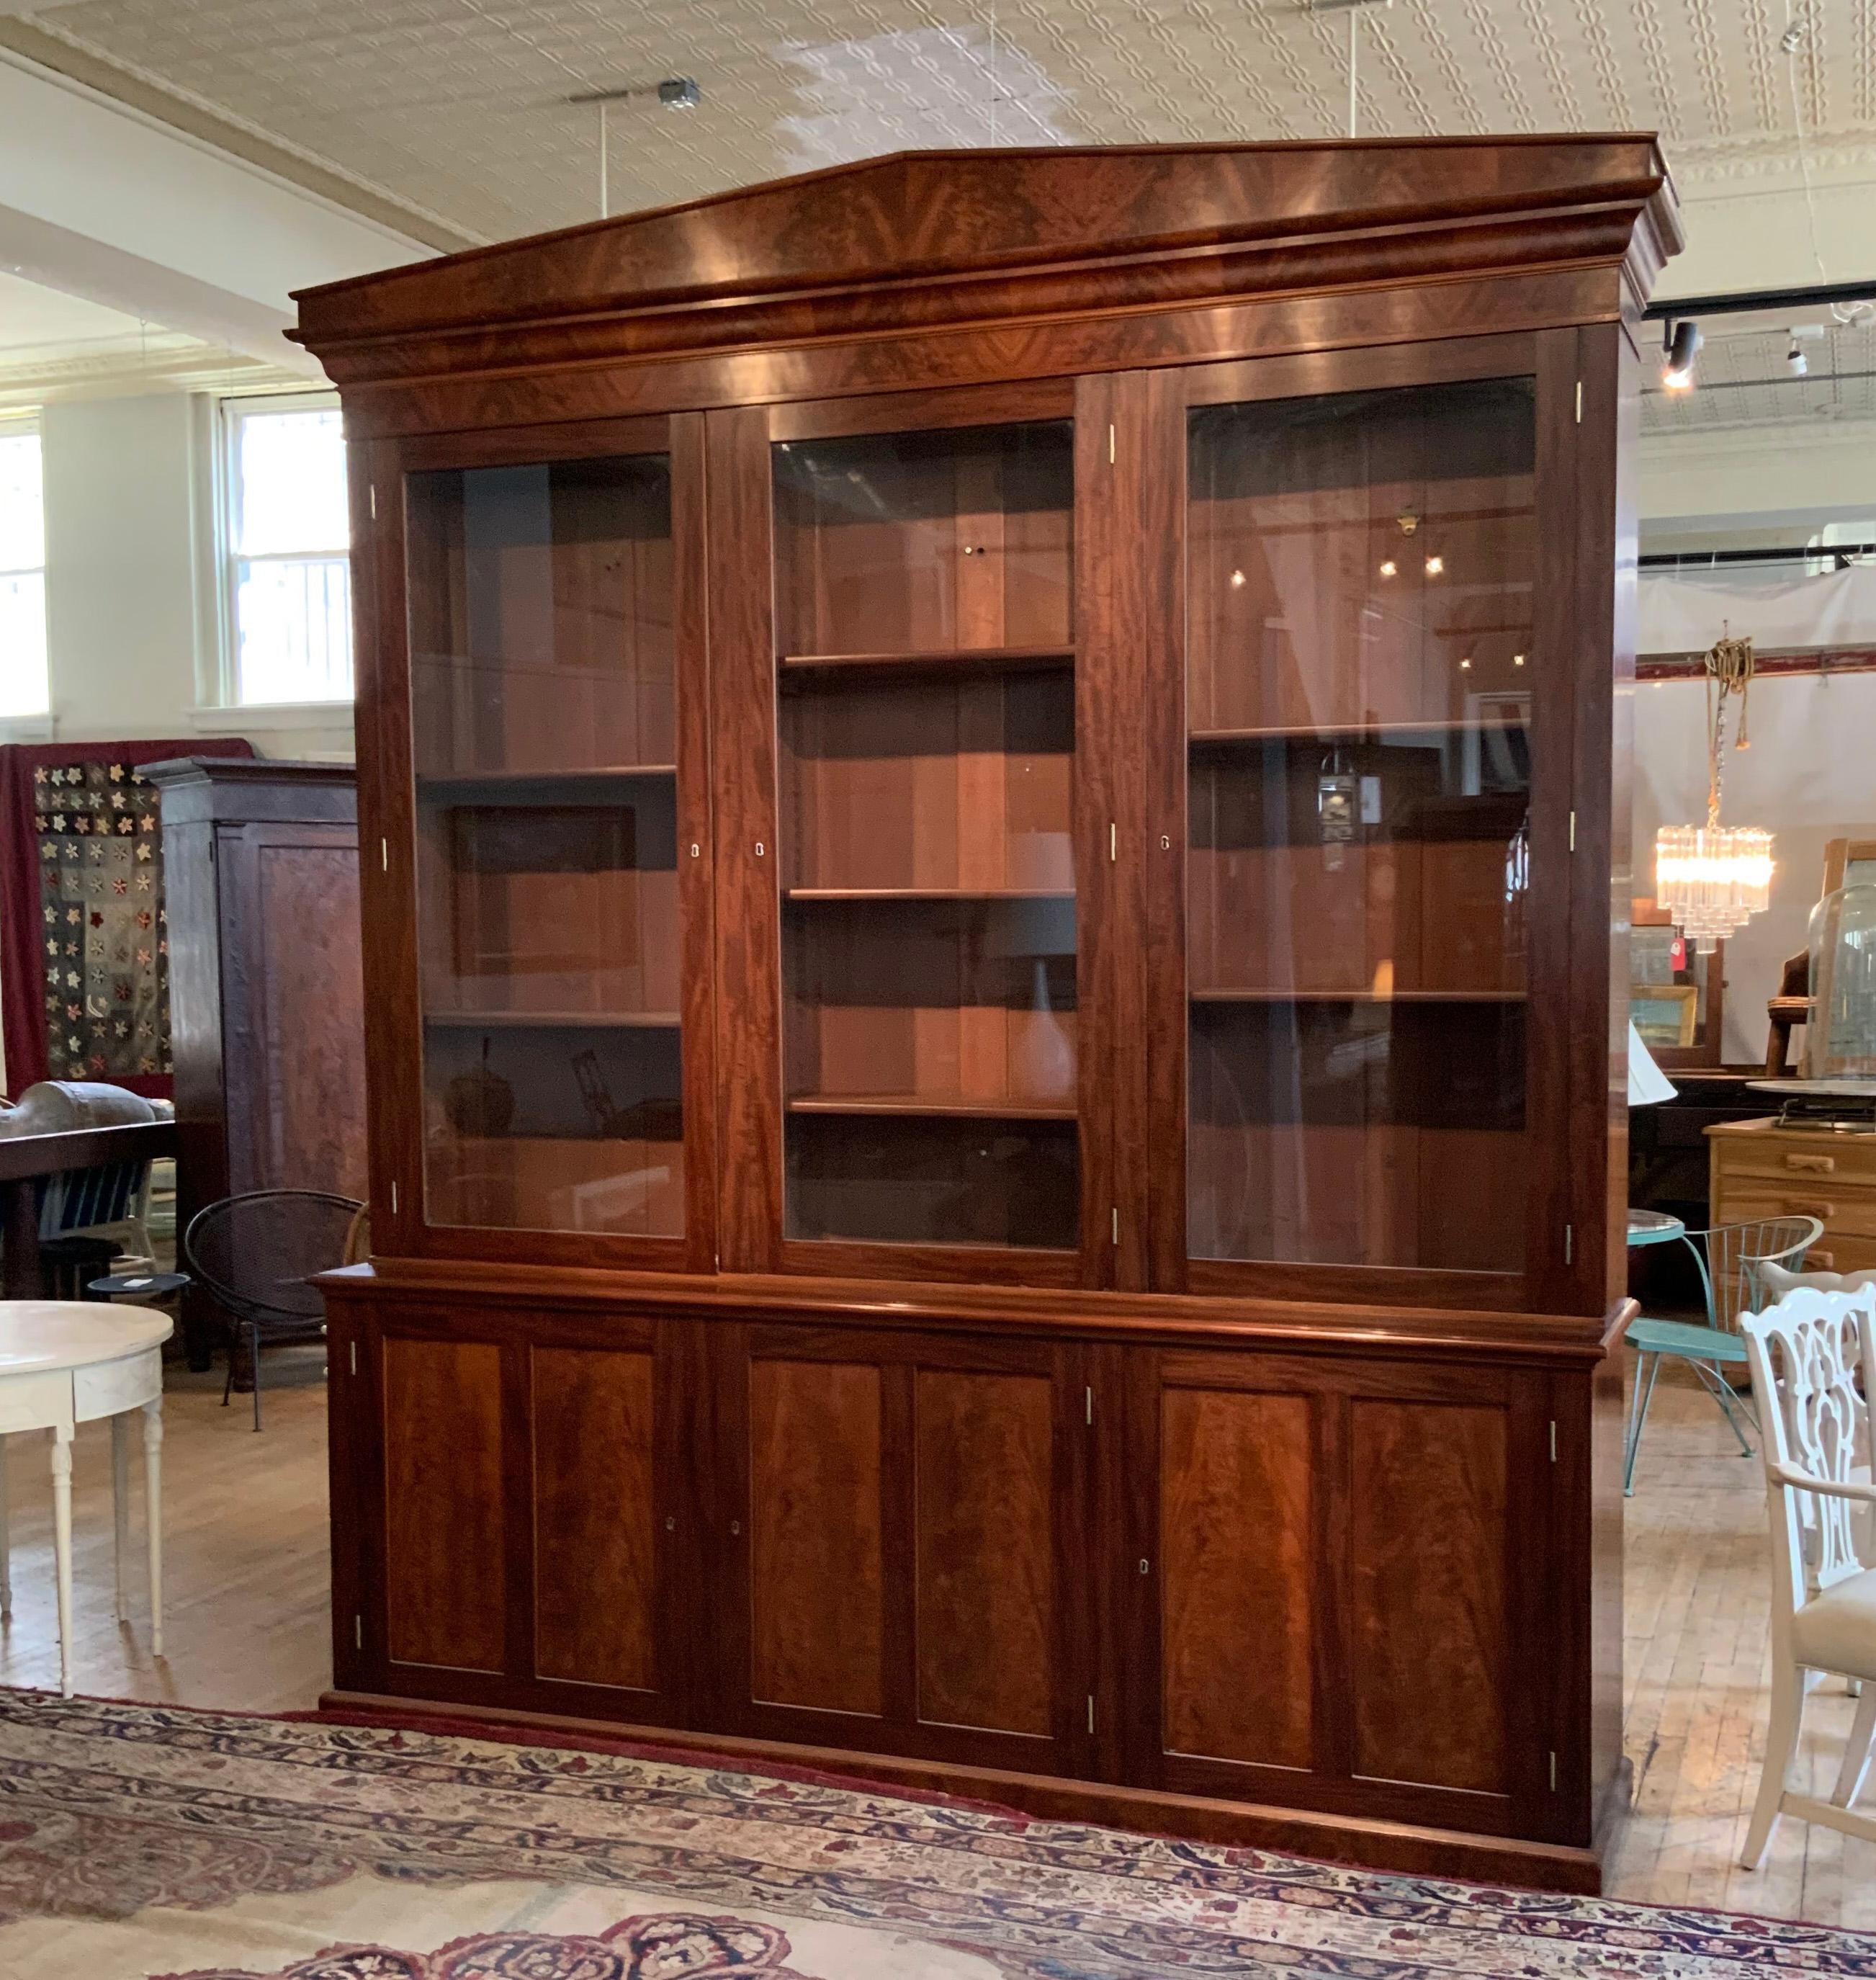 A very handsome and impressive large mahogany bookcase cabinet from a Harvard library. This beautiful cabinet has three glass doors above with many adjustable shelves, and three mahogany doors below also concealing adjustable interior shelves.